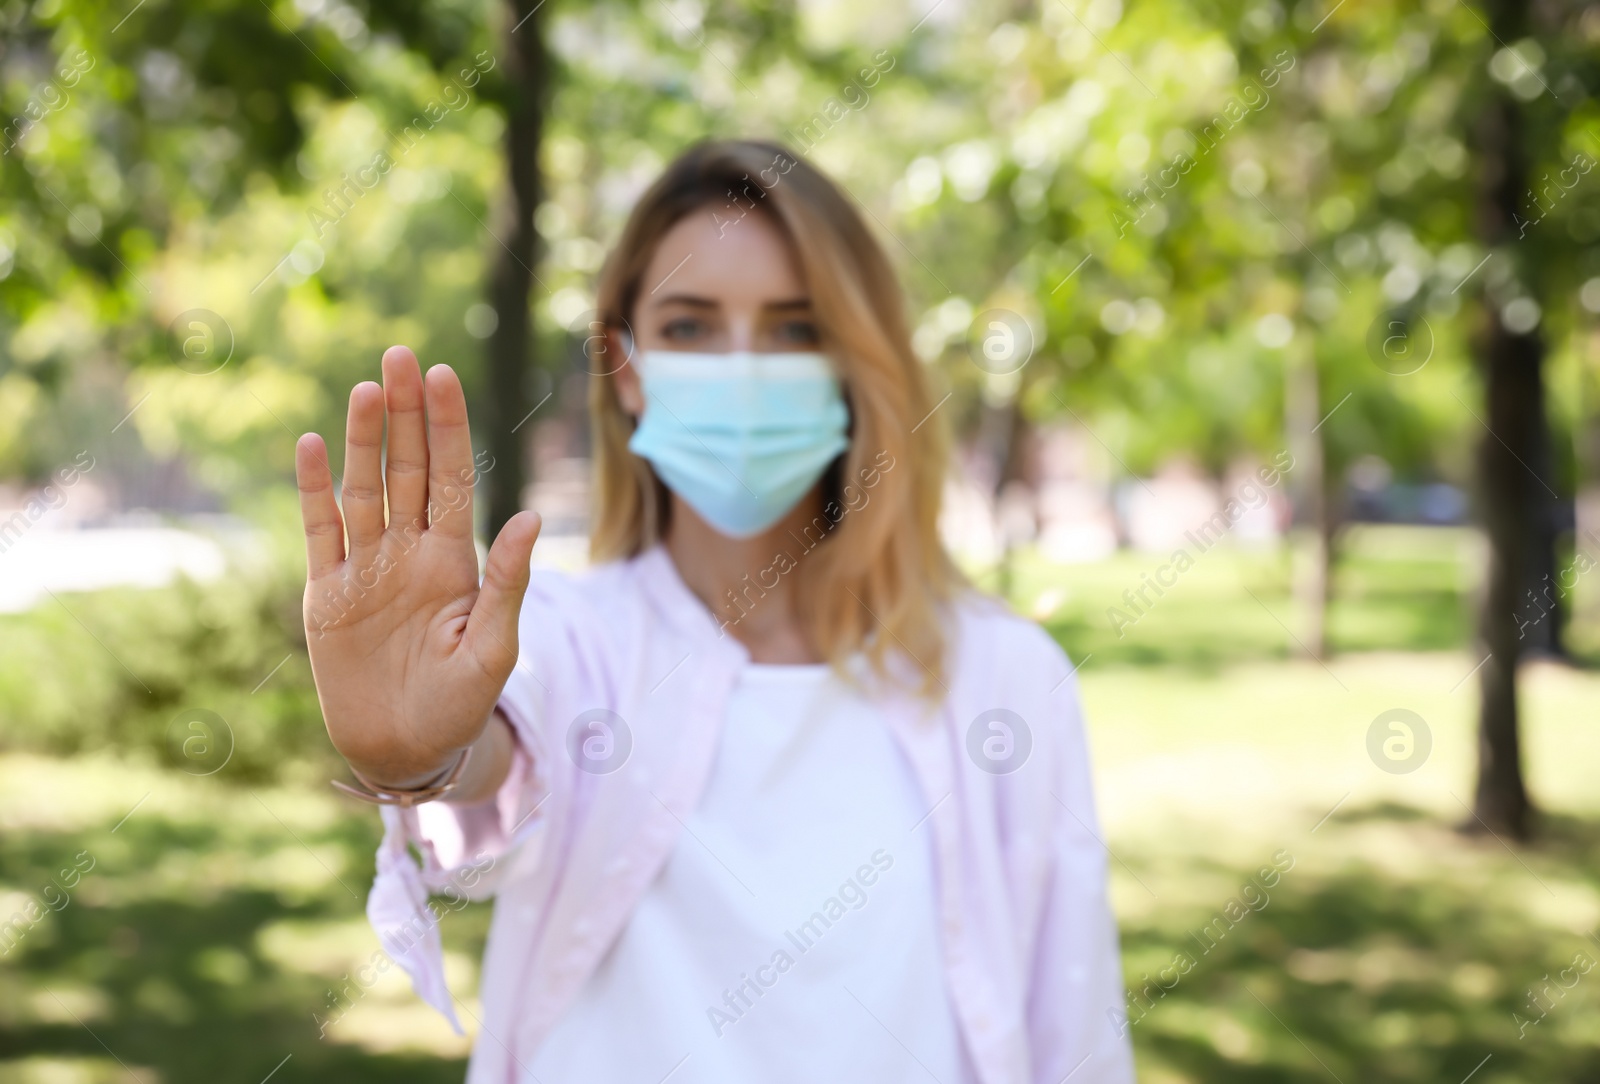 Photo of Woman in protective face mask showing stop gesture in park, focus on hand. Prevent spreading of coronavirus